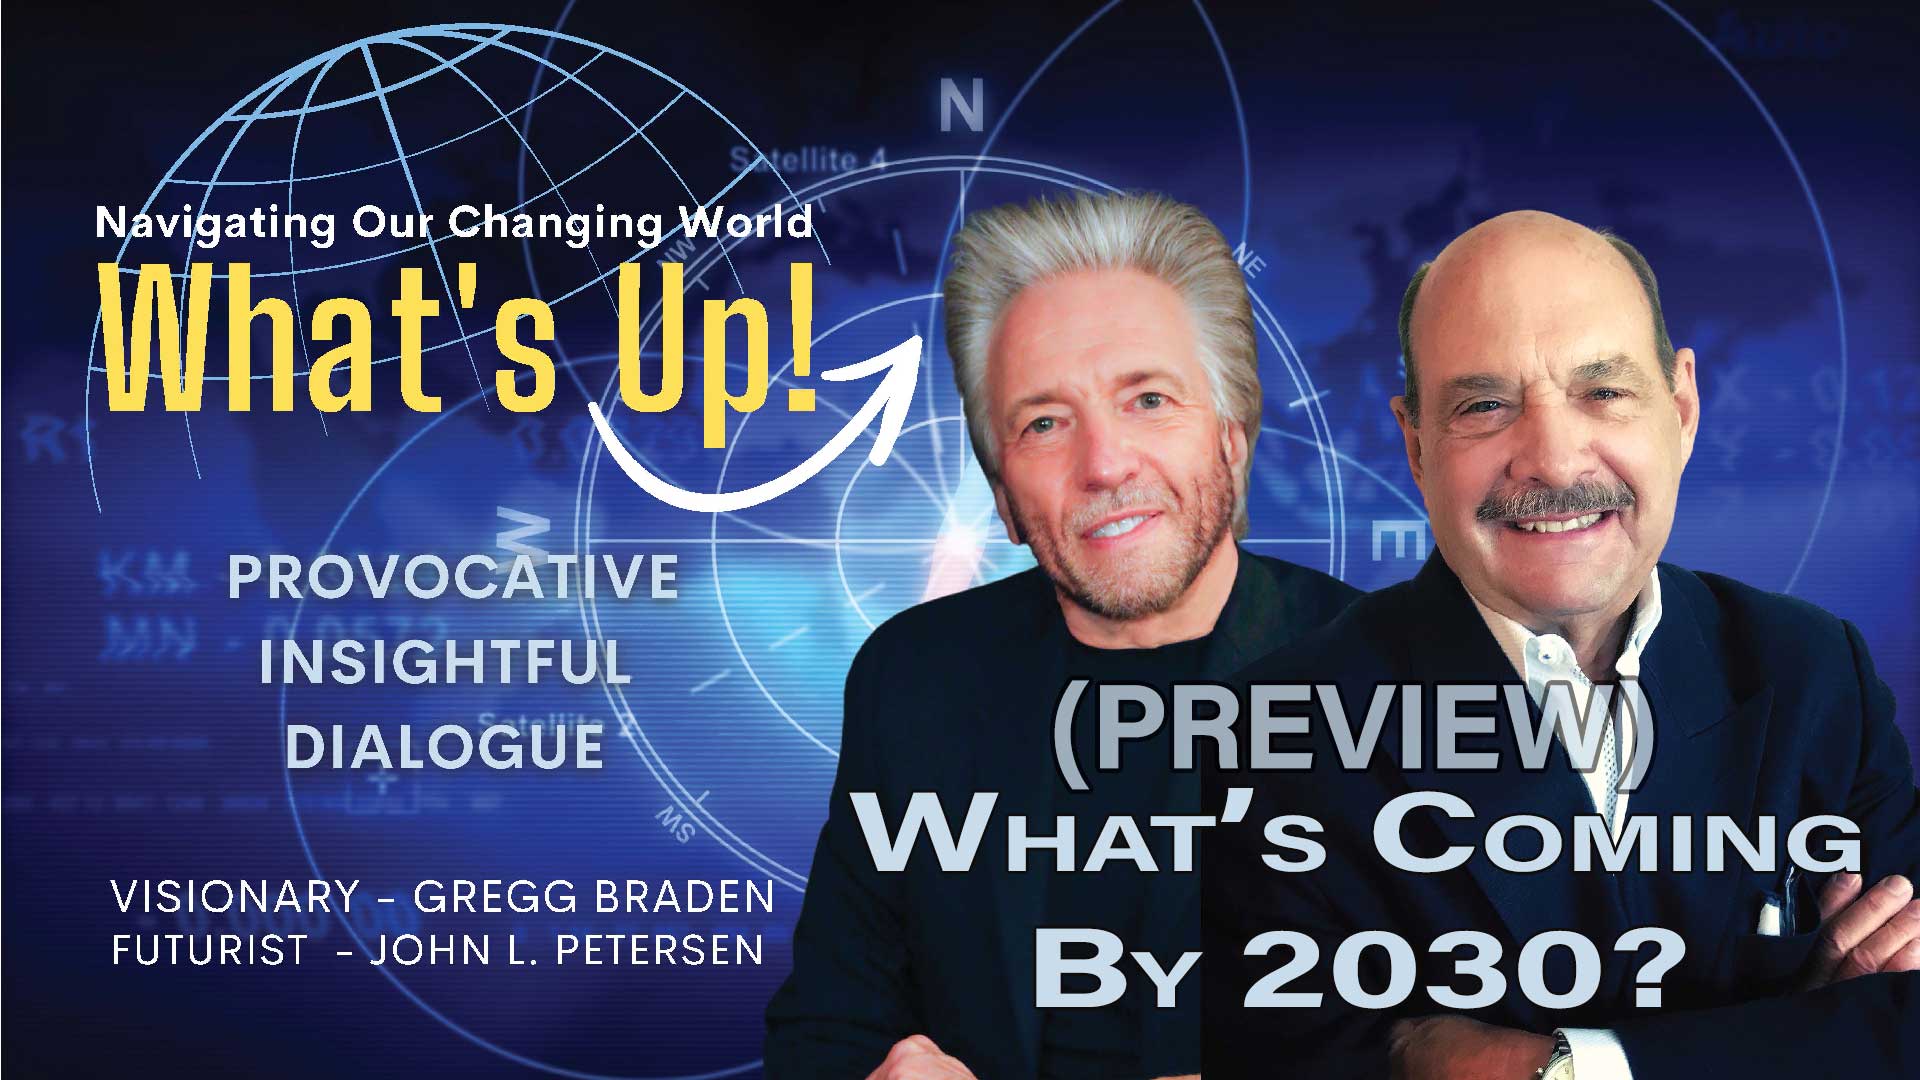 what's coming by 2030 with Gregg Braden and John Petersen